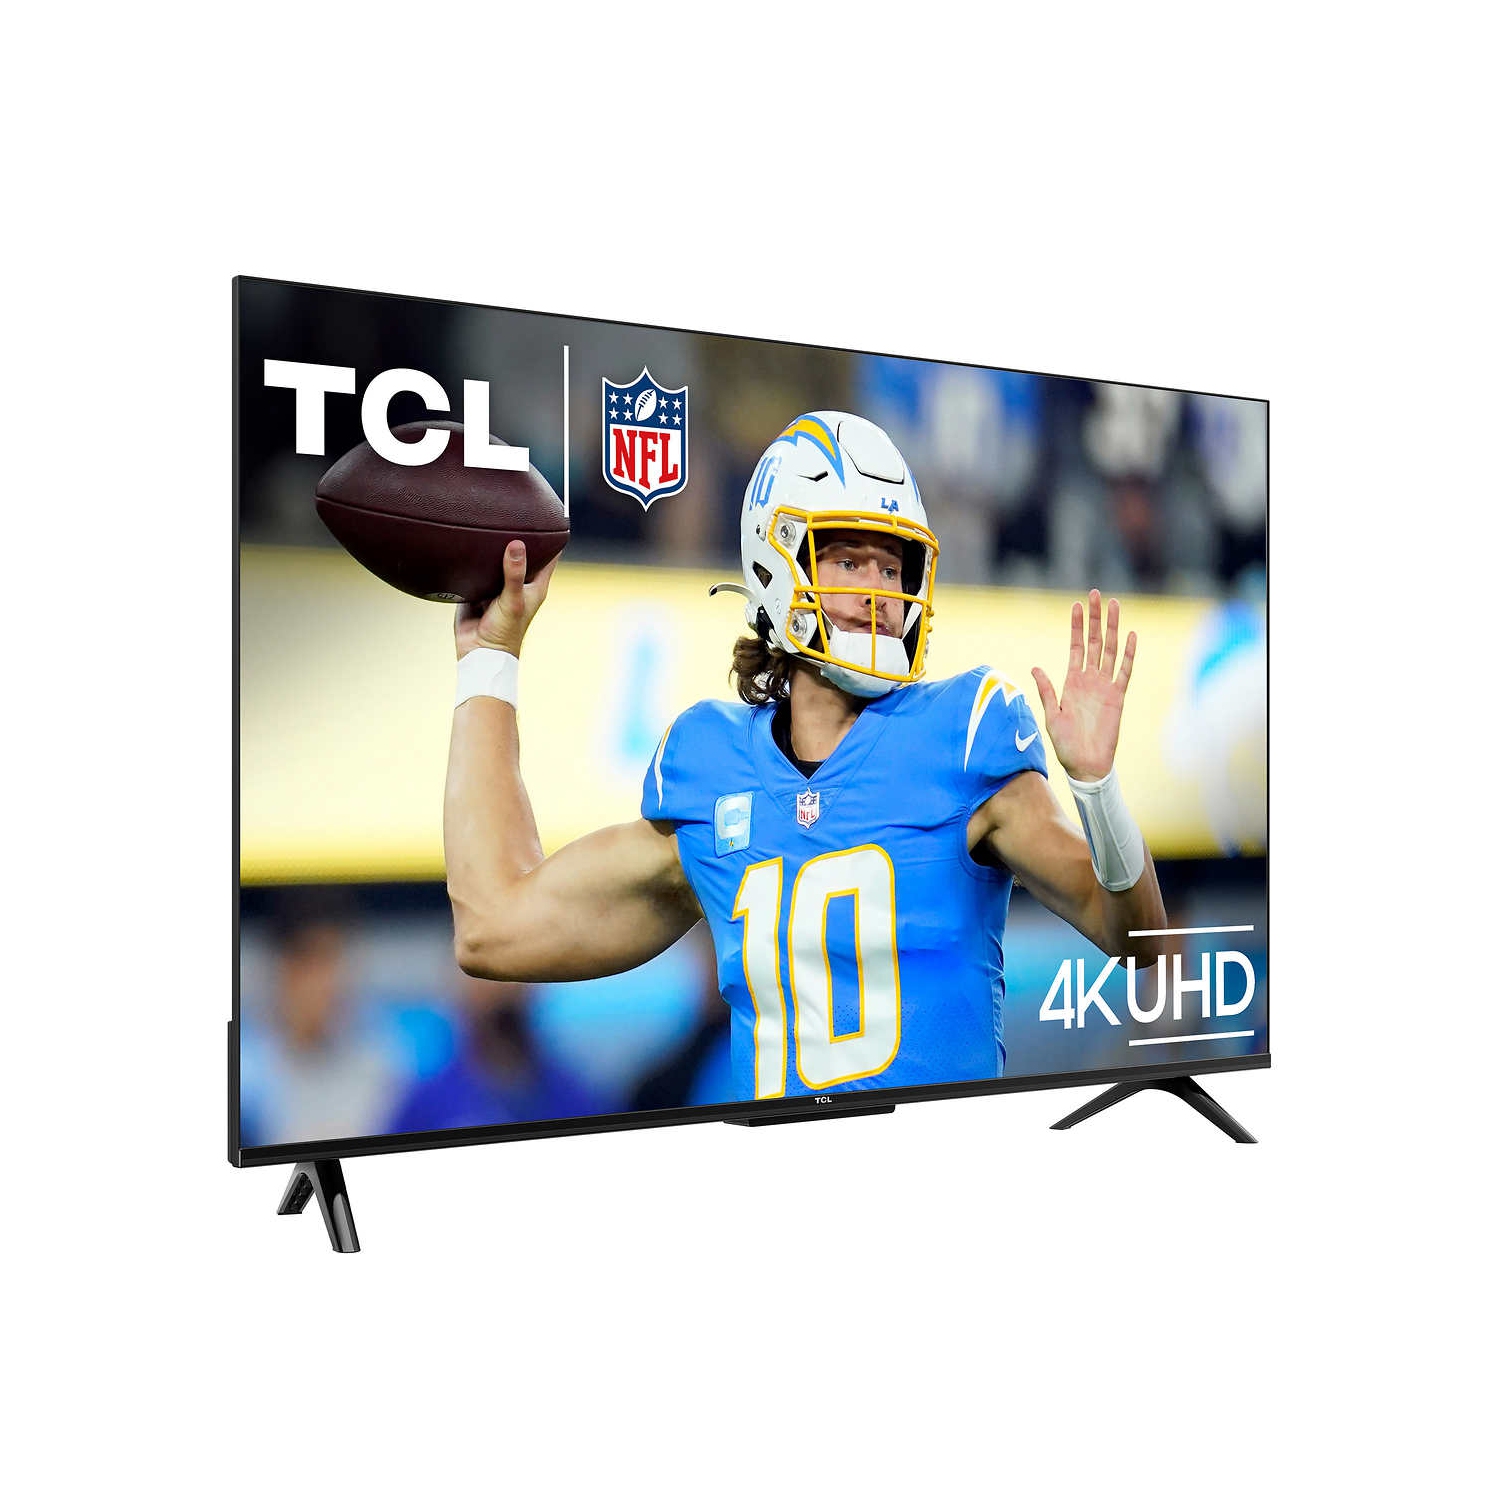 REFURBISHED(Good) - TCL 55" Class S Class 4K UHD HDR LED Smart TV with Google TV (55S470G)